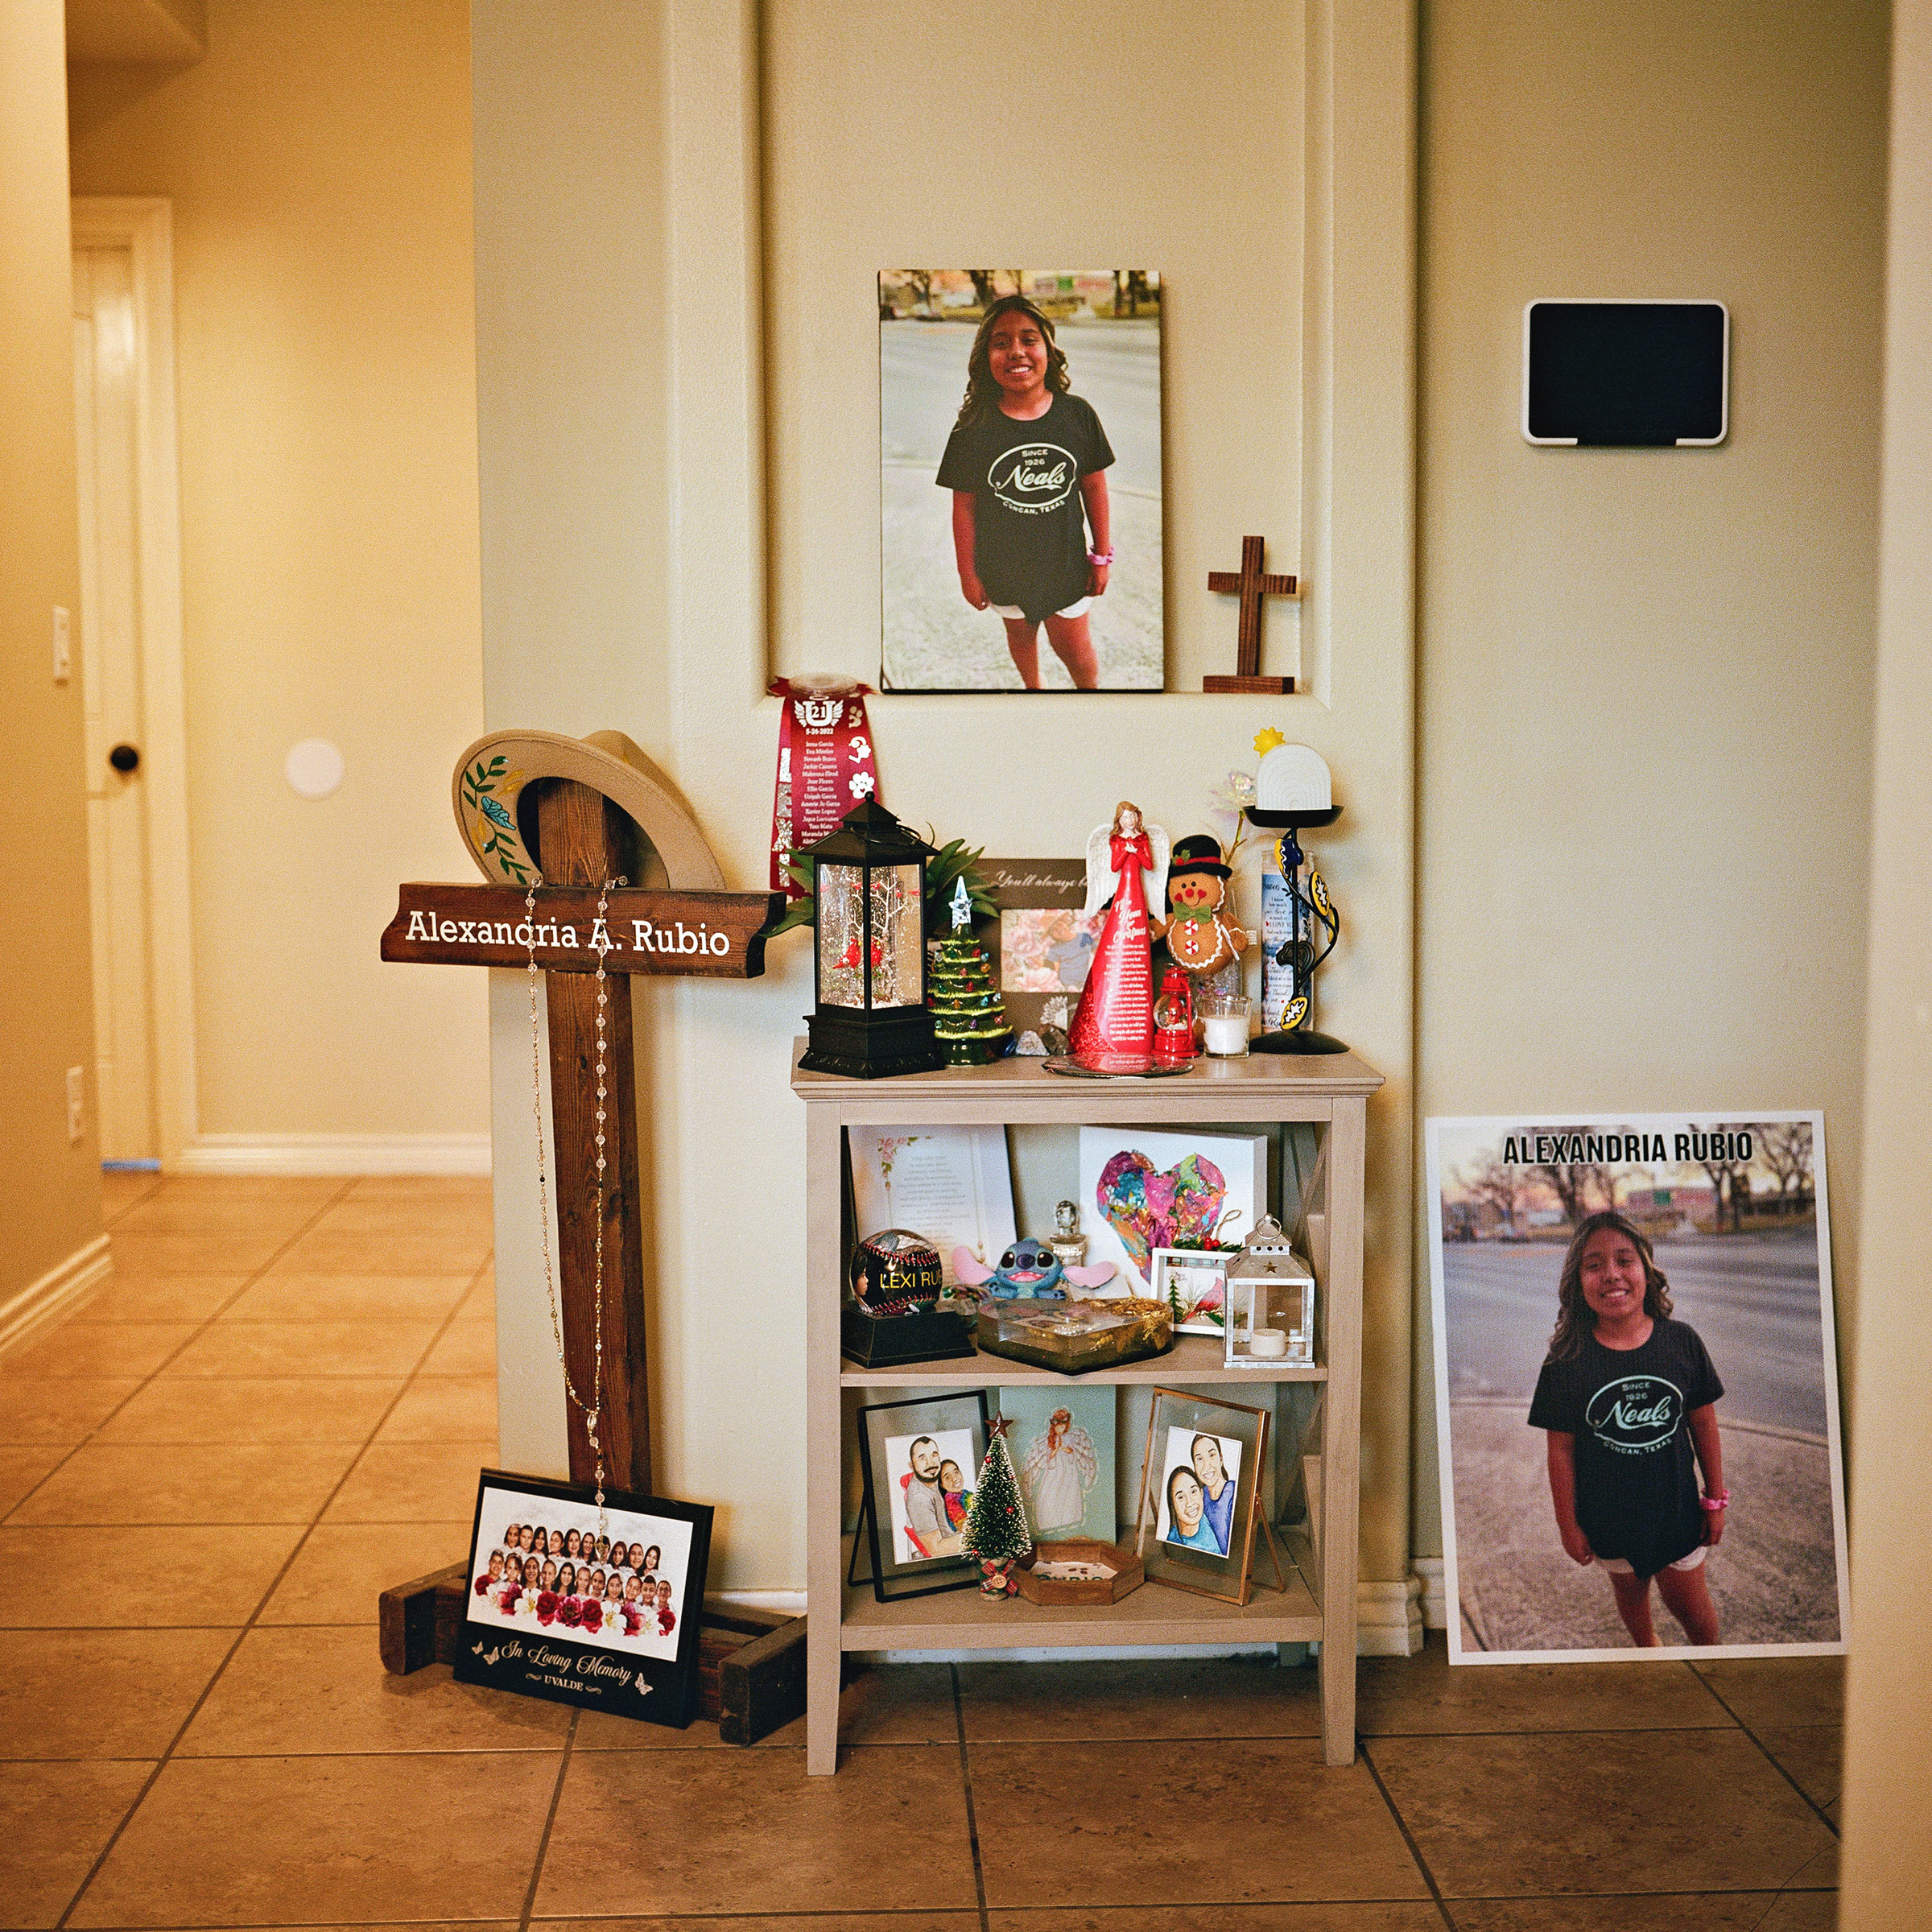 A memorial for Lexi in her parents' home in Uvlade. (Christopher Lee for TIME)